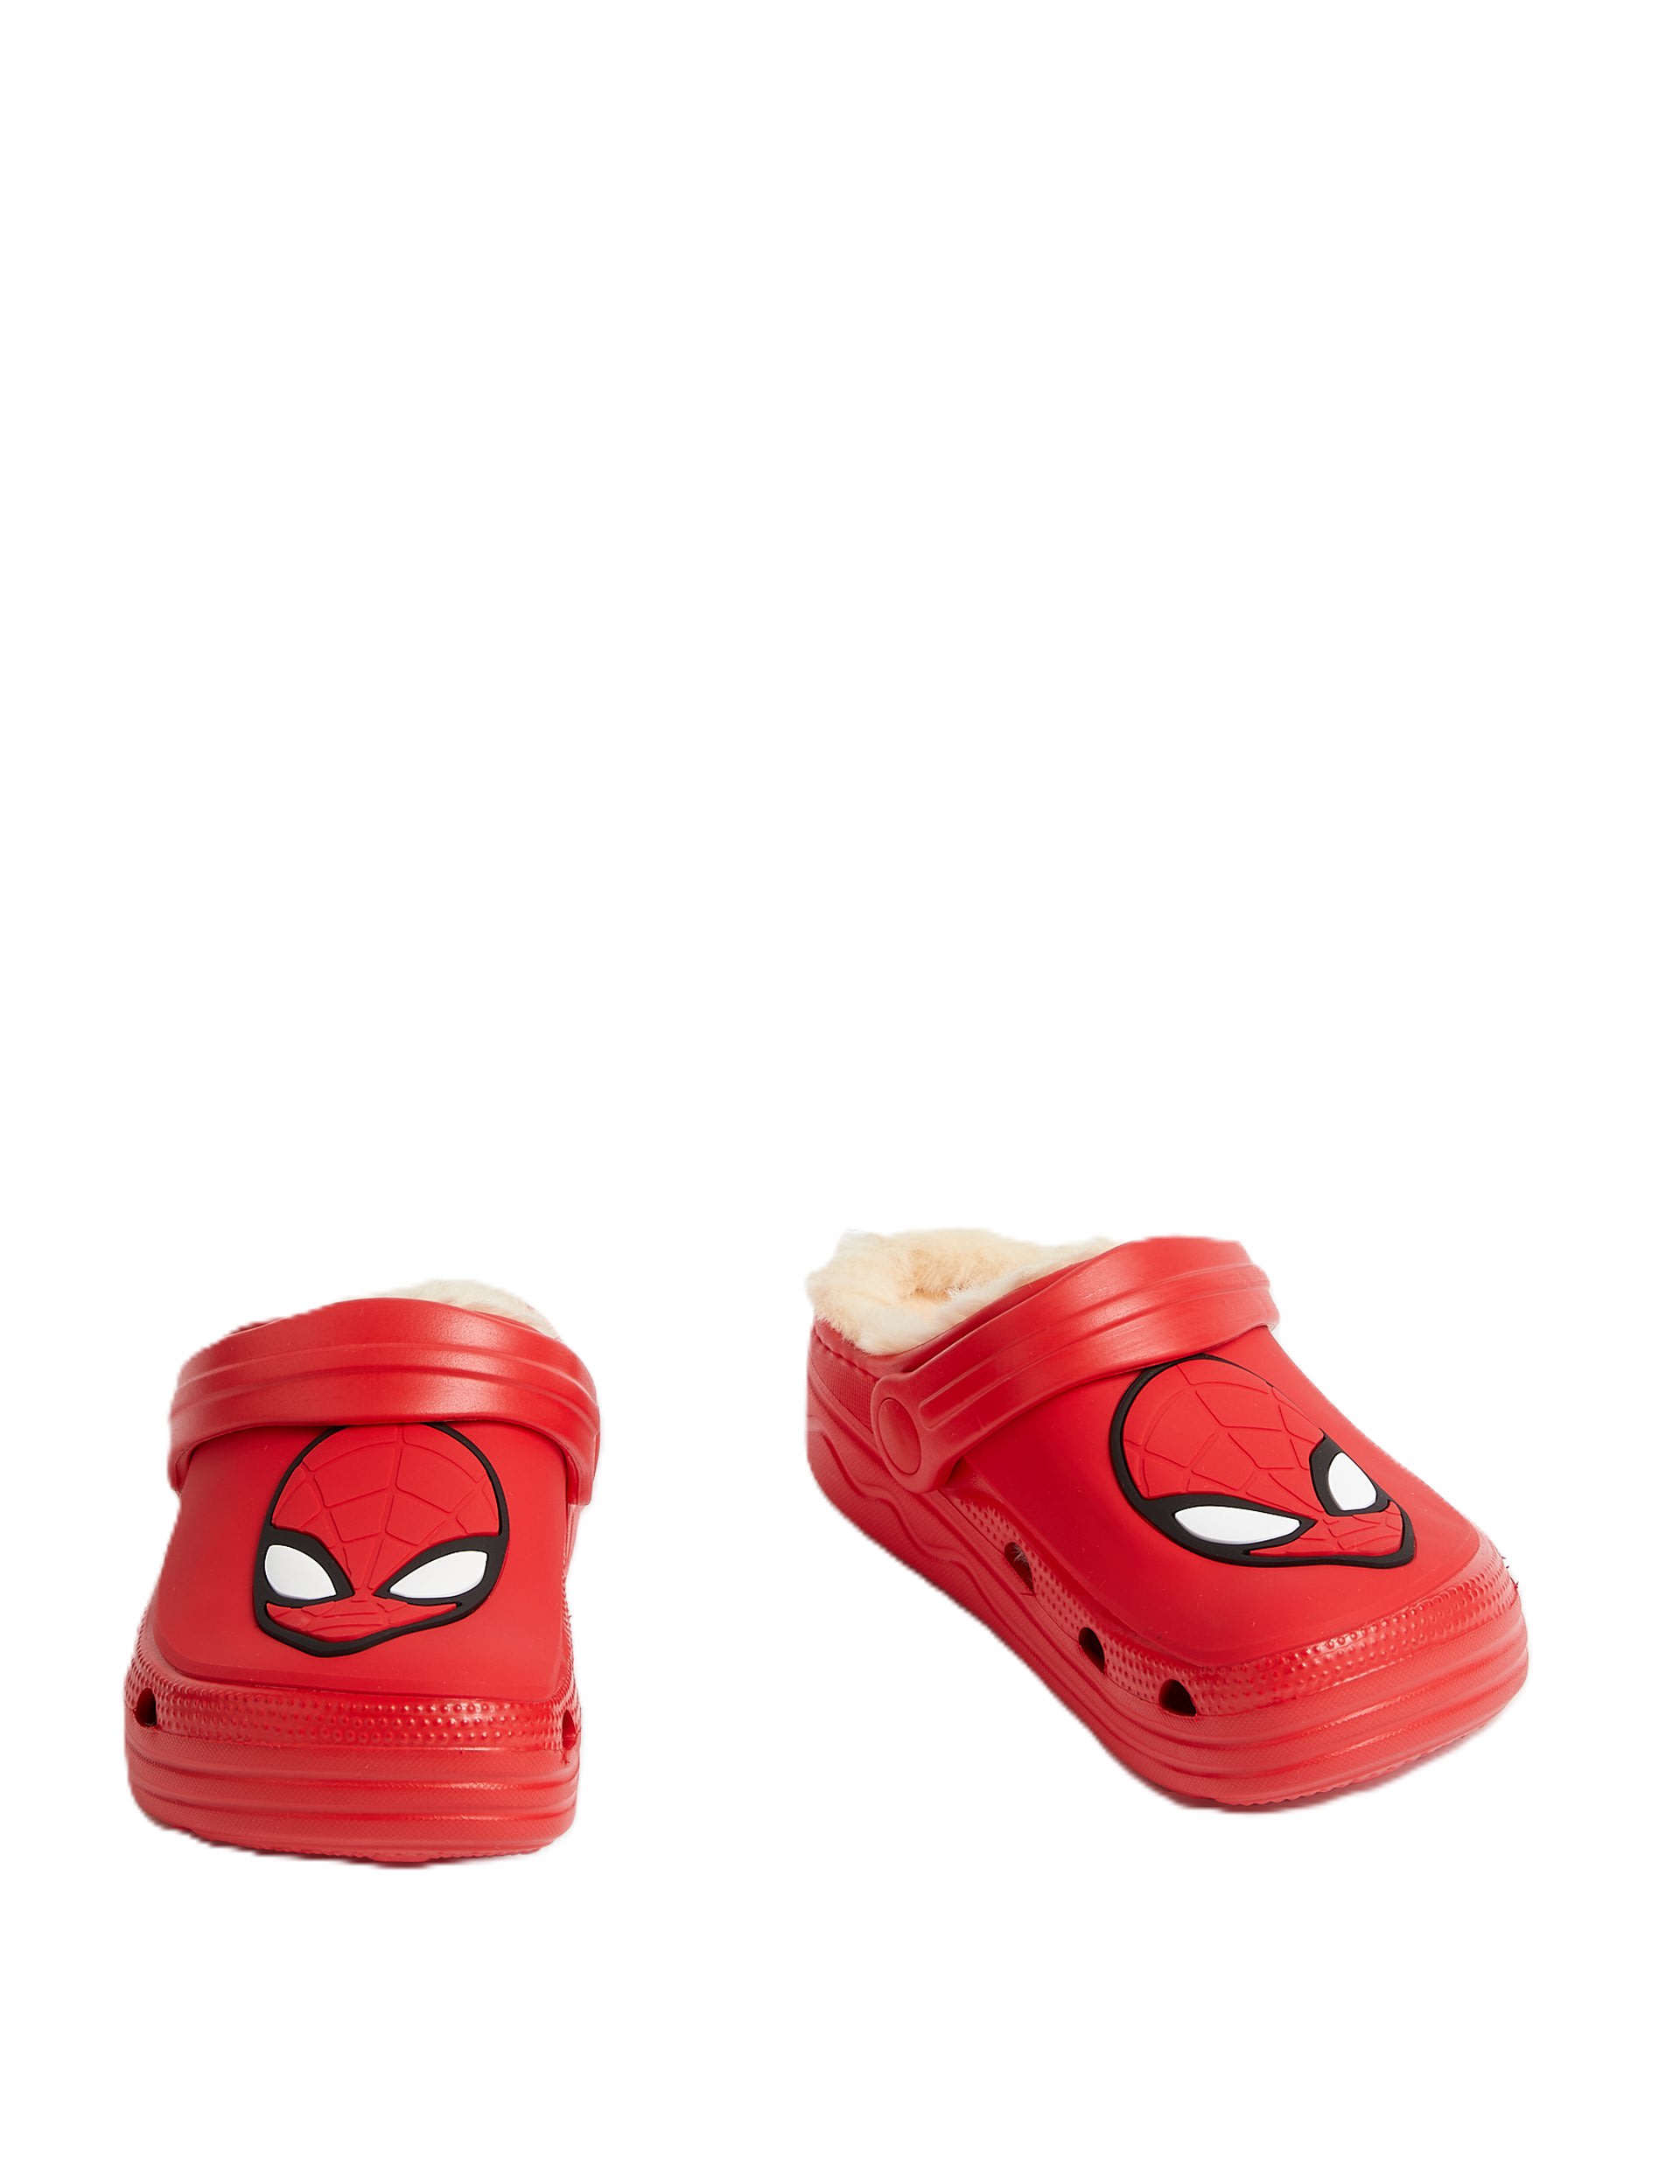 Kids' Spider-Man™ Clogs (4 Small - 2 Large)